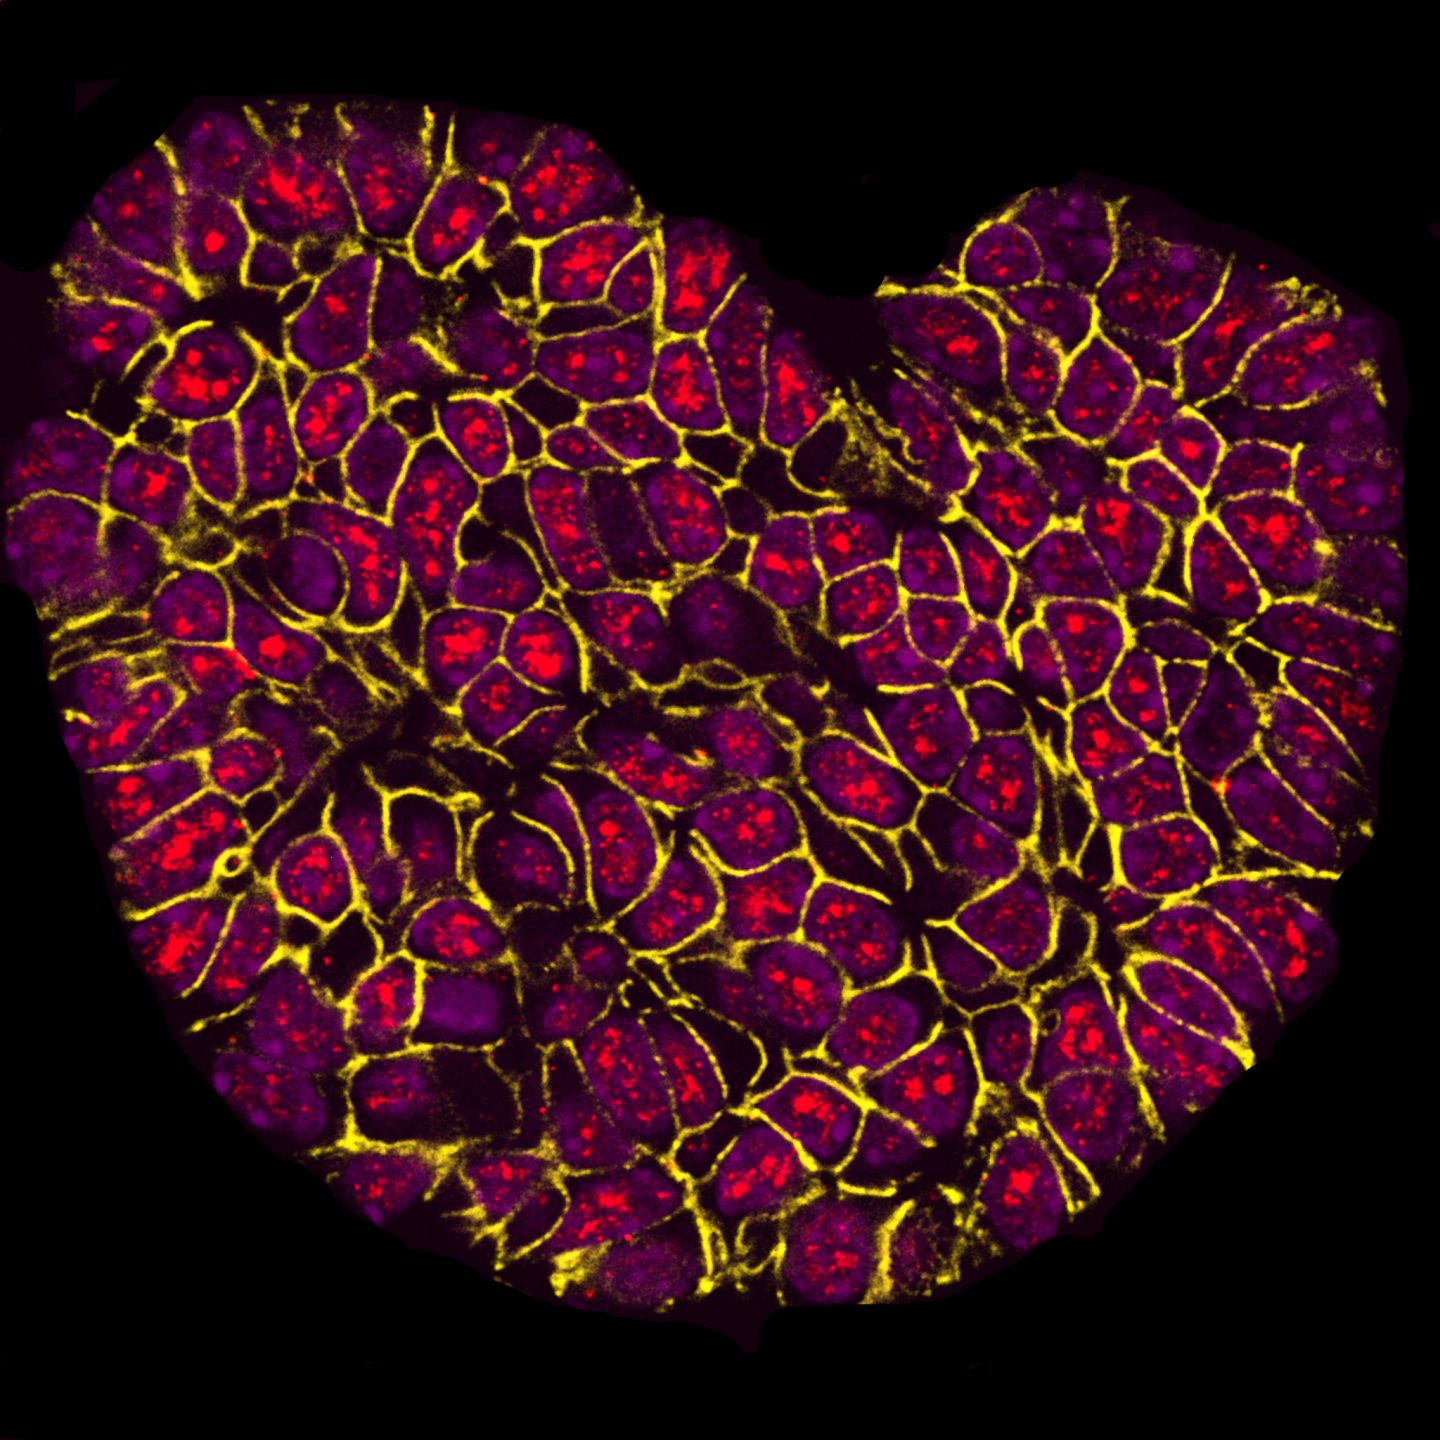 'I Heart Research': First prize winner in the BMC Research in Progress Photo Competition